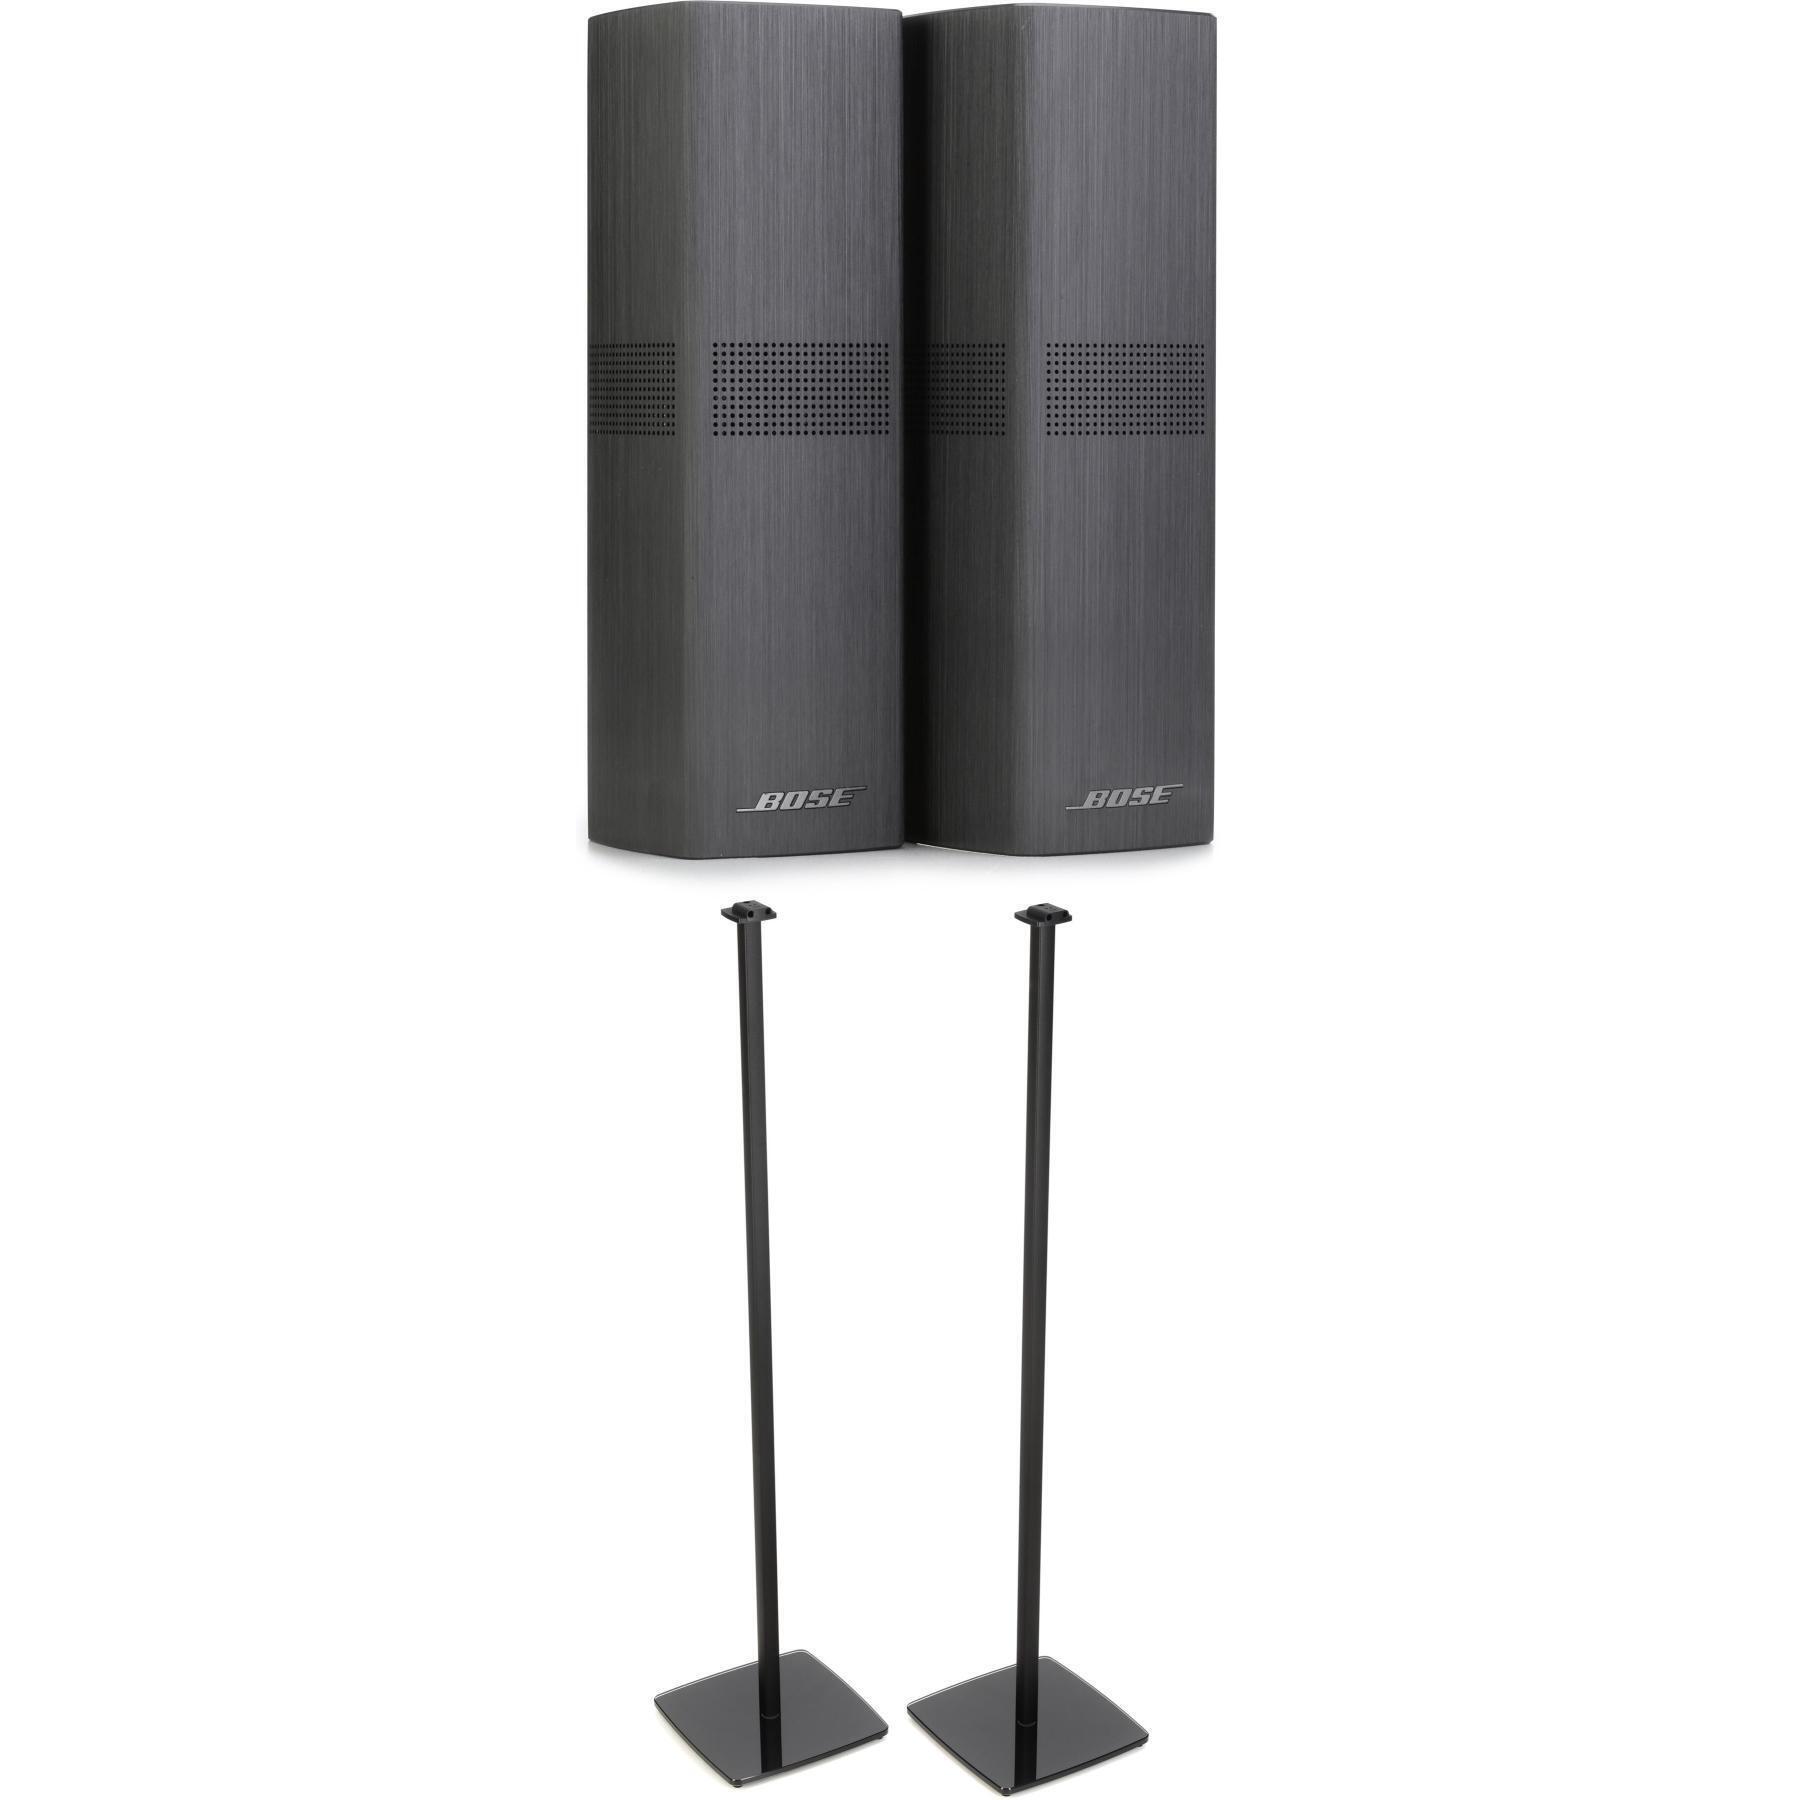 Bose Surround Speakers 700 with Stands - Black | Sweetwater